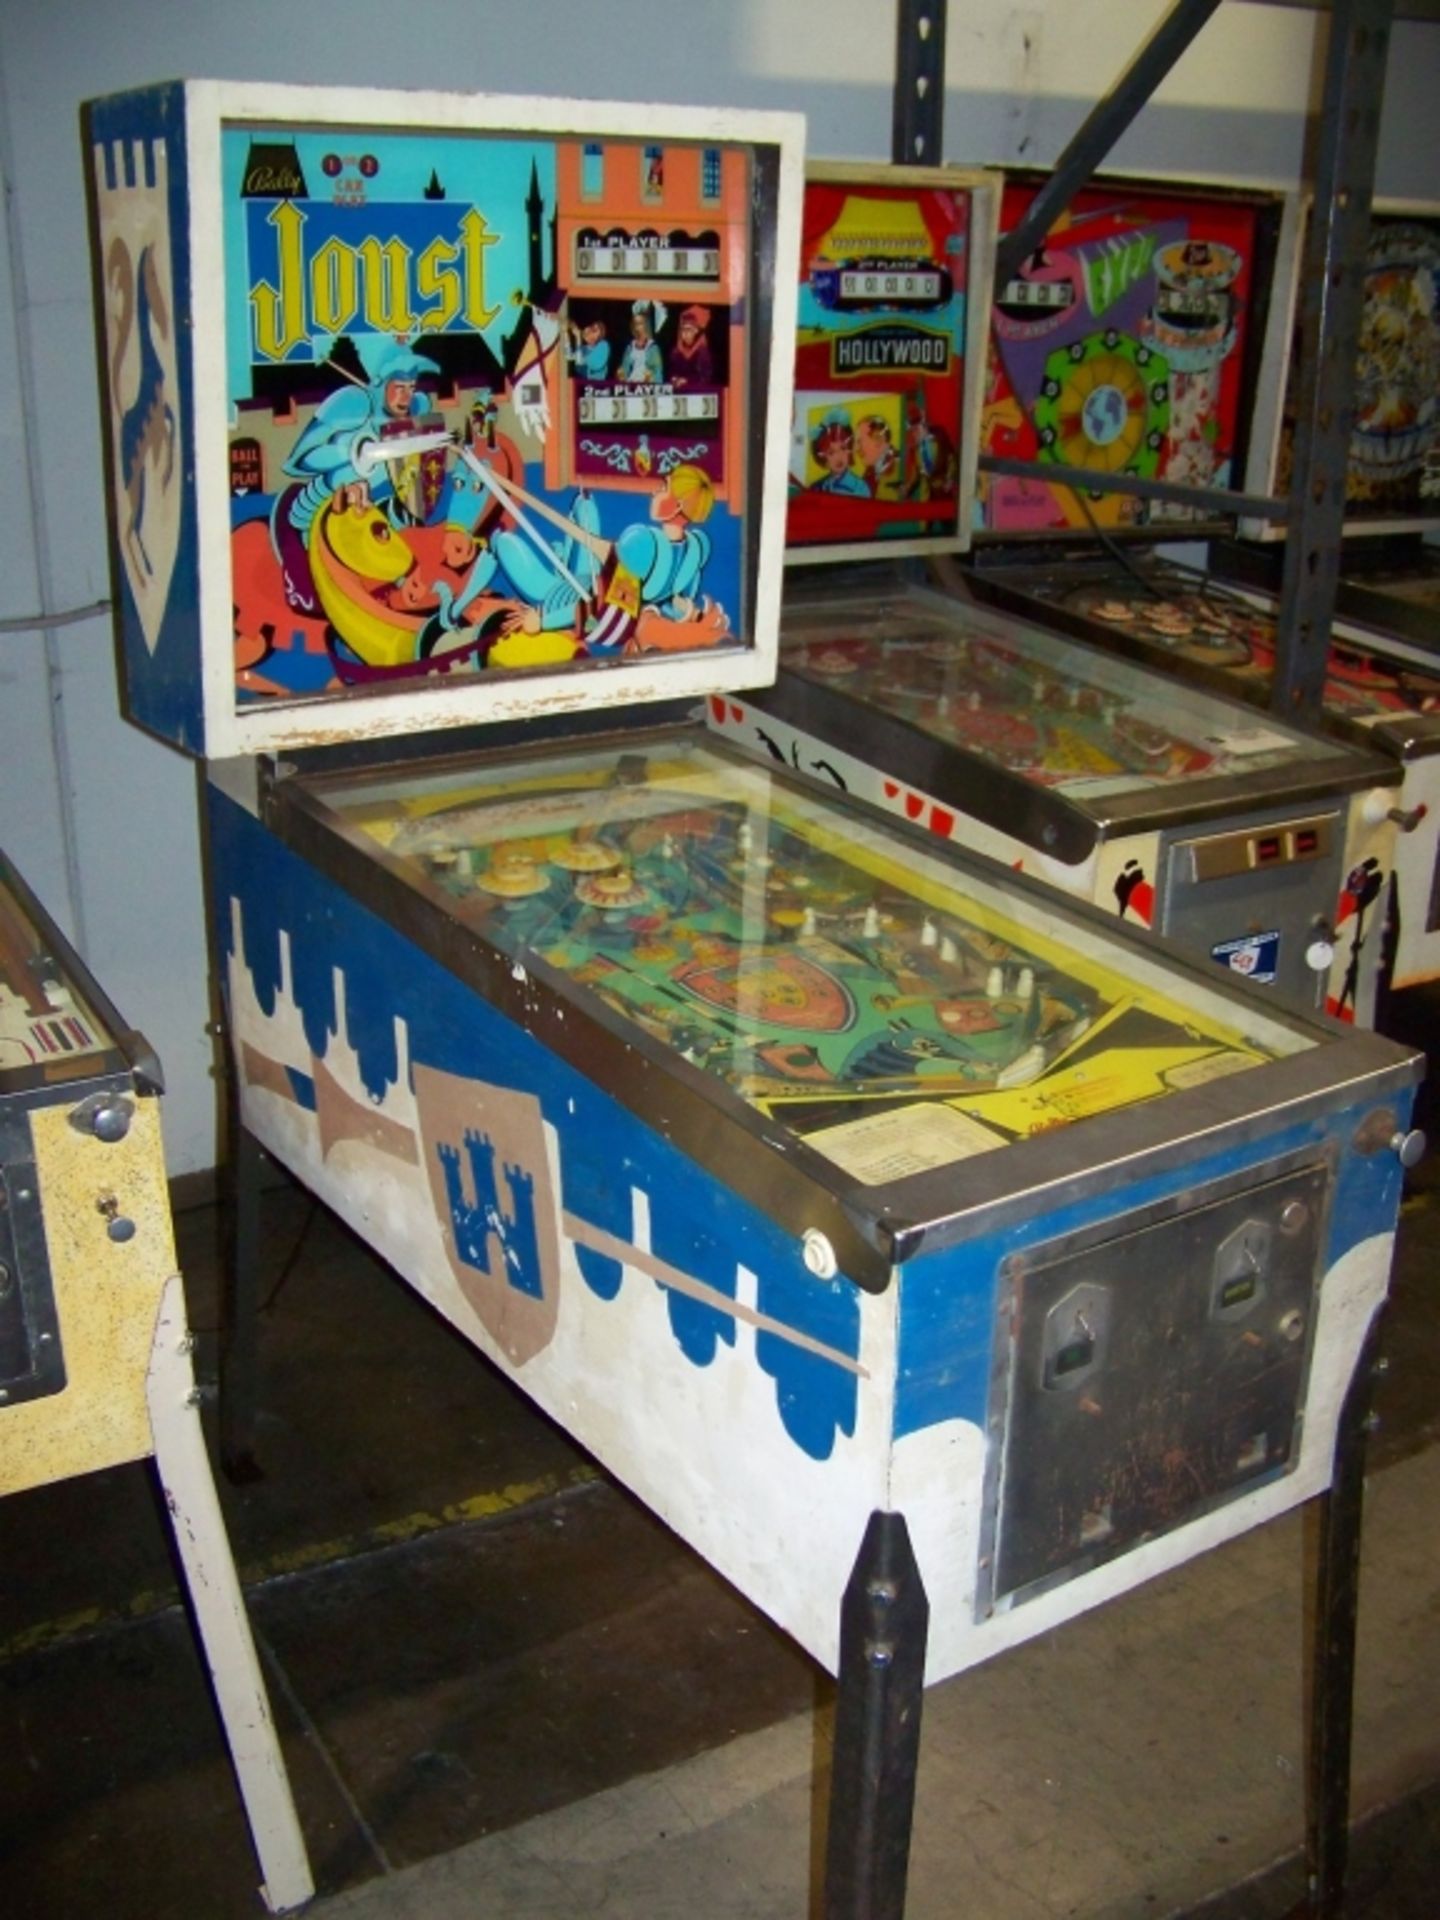 JOUST CLASSIC PINBALL MACHINE BALLY 1969 Item is in used condition. Evidence of wear and